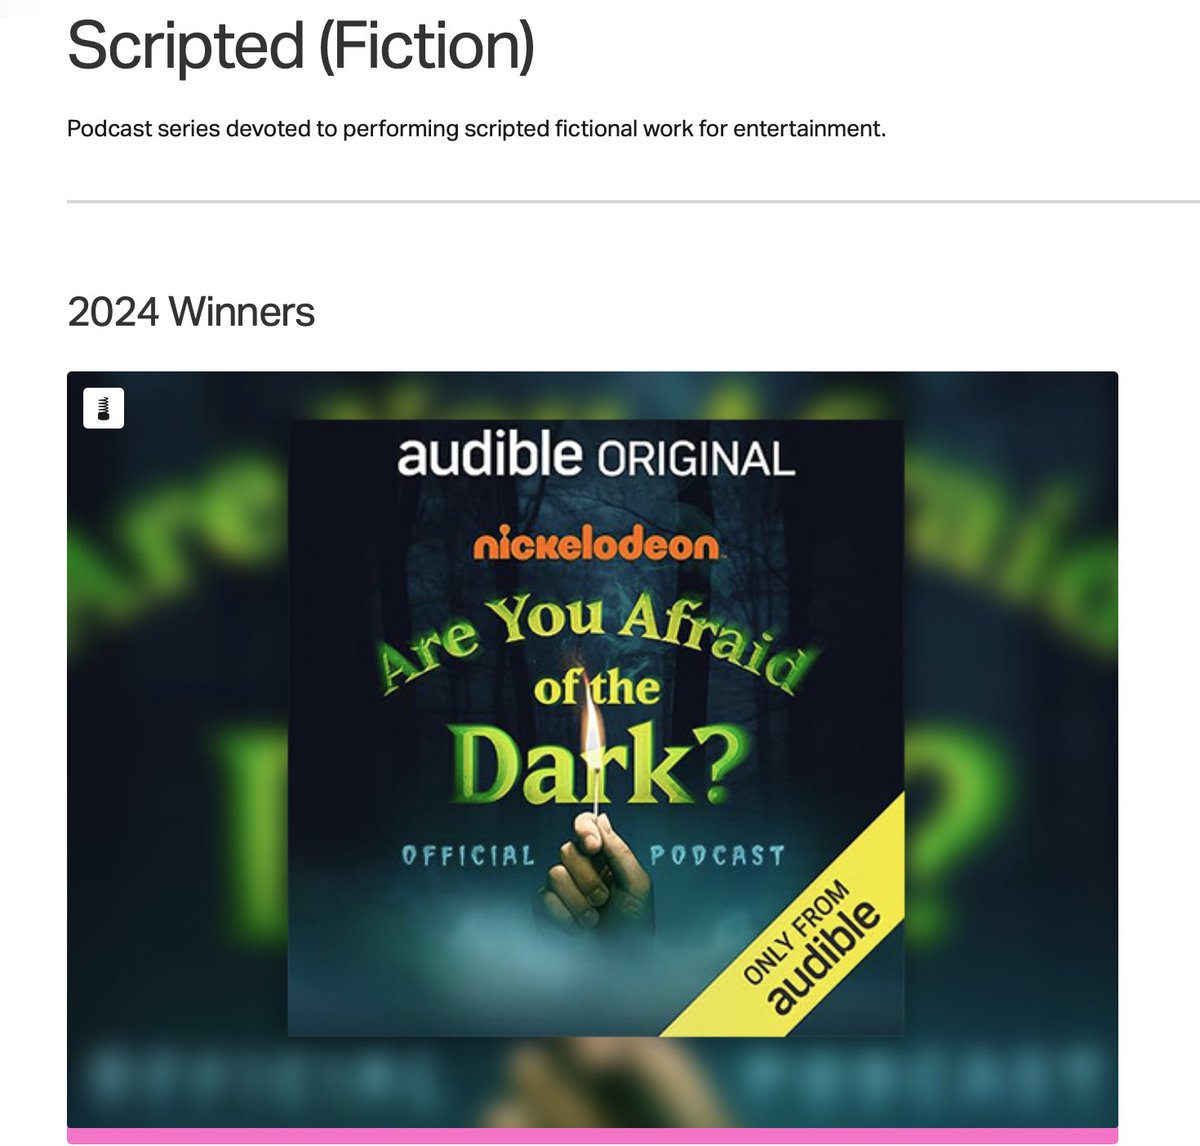 Nickelodeon and Audible's ARE YOU AFRAID OF THE DARK? Official Podcast - produced by Gideon Media - wins the @TheWebbyAwards for Scripted Fiction!